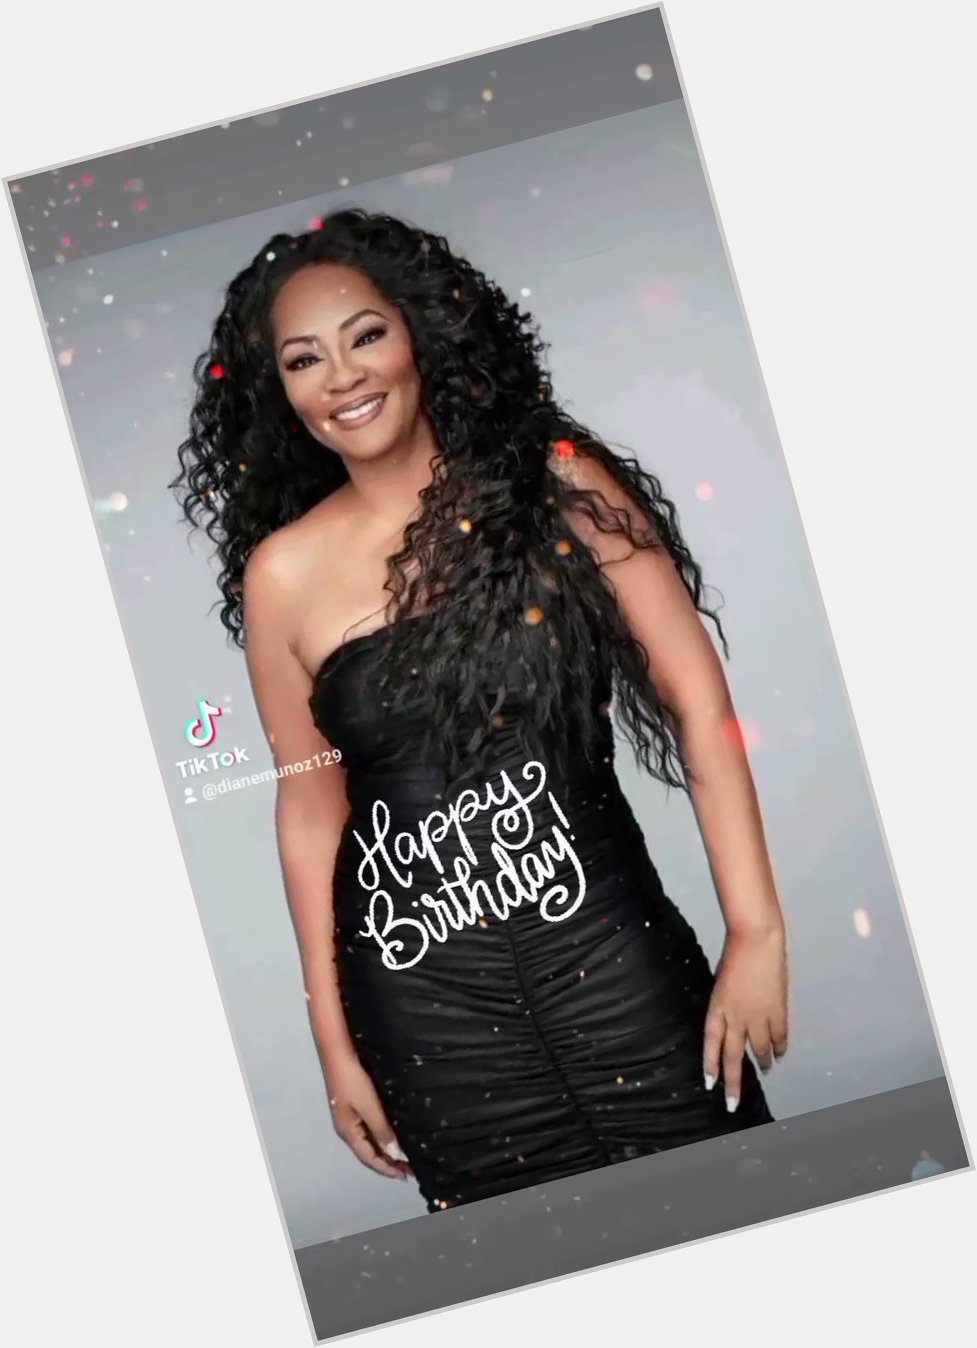 Happy 64th Birthday To The Legendary Jody Watley (R&B Singer/Songwriter & Record Producer) January 30th,1959 